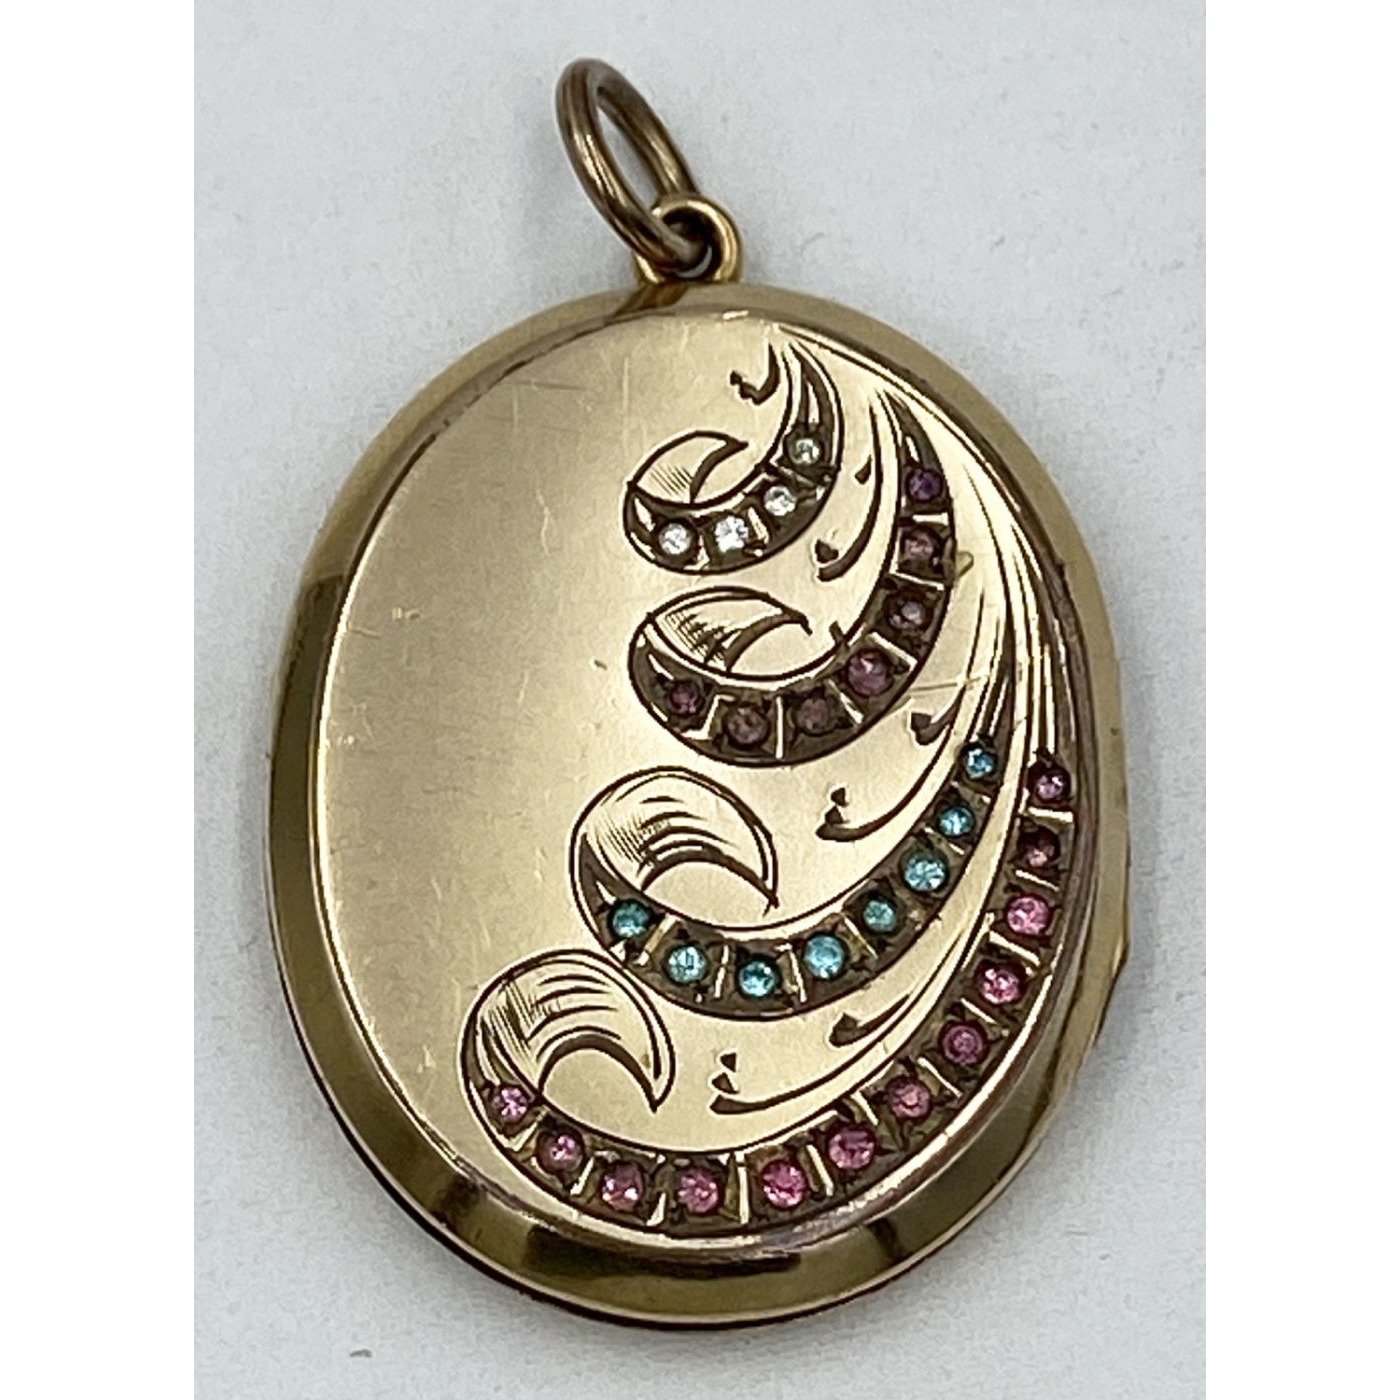 Excellent Gold-Filled Locket with Colored Stones